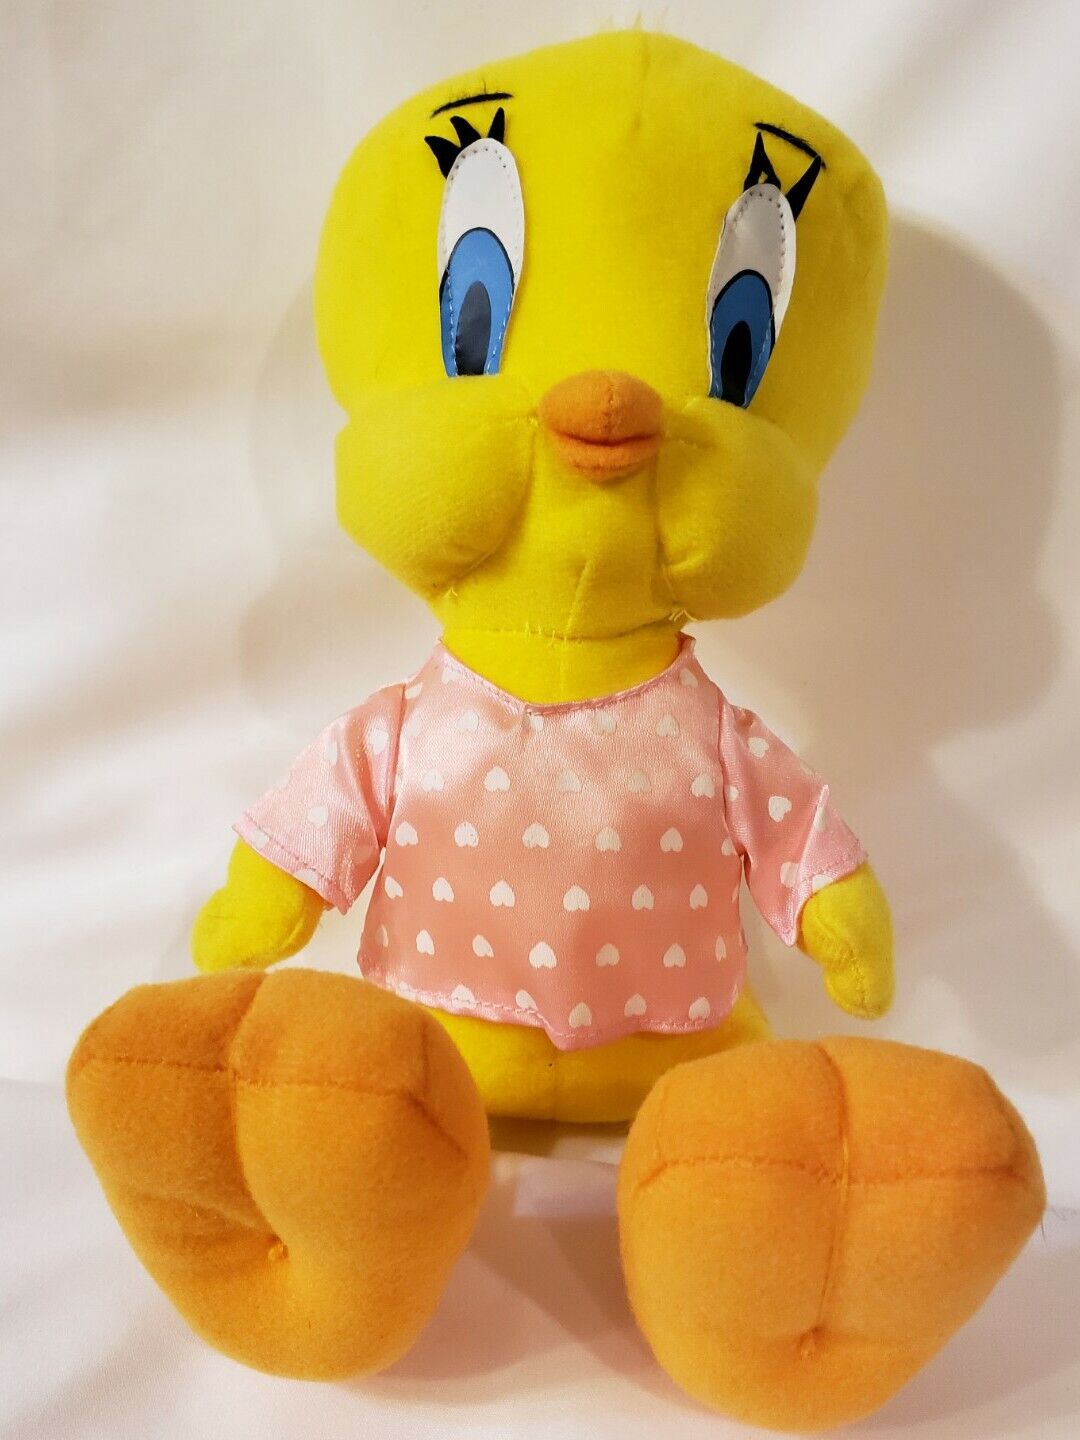 1998 Russell Stover Candies Sale price Looney Tunes Toy Bird Directly managed store Tweety T Plush